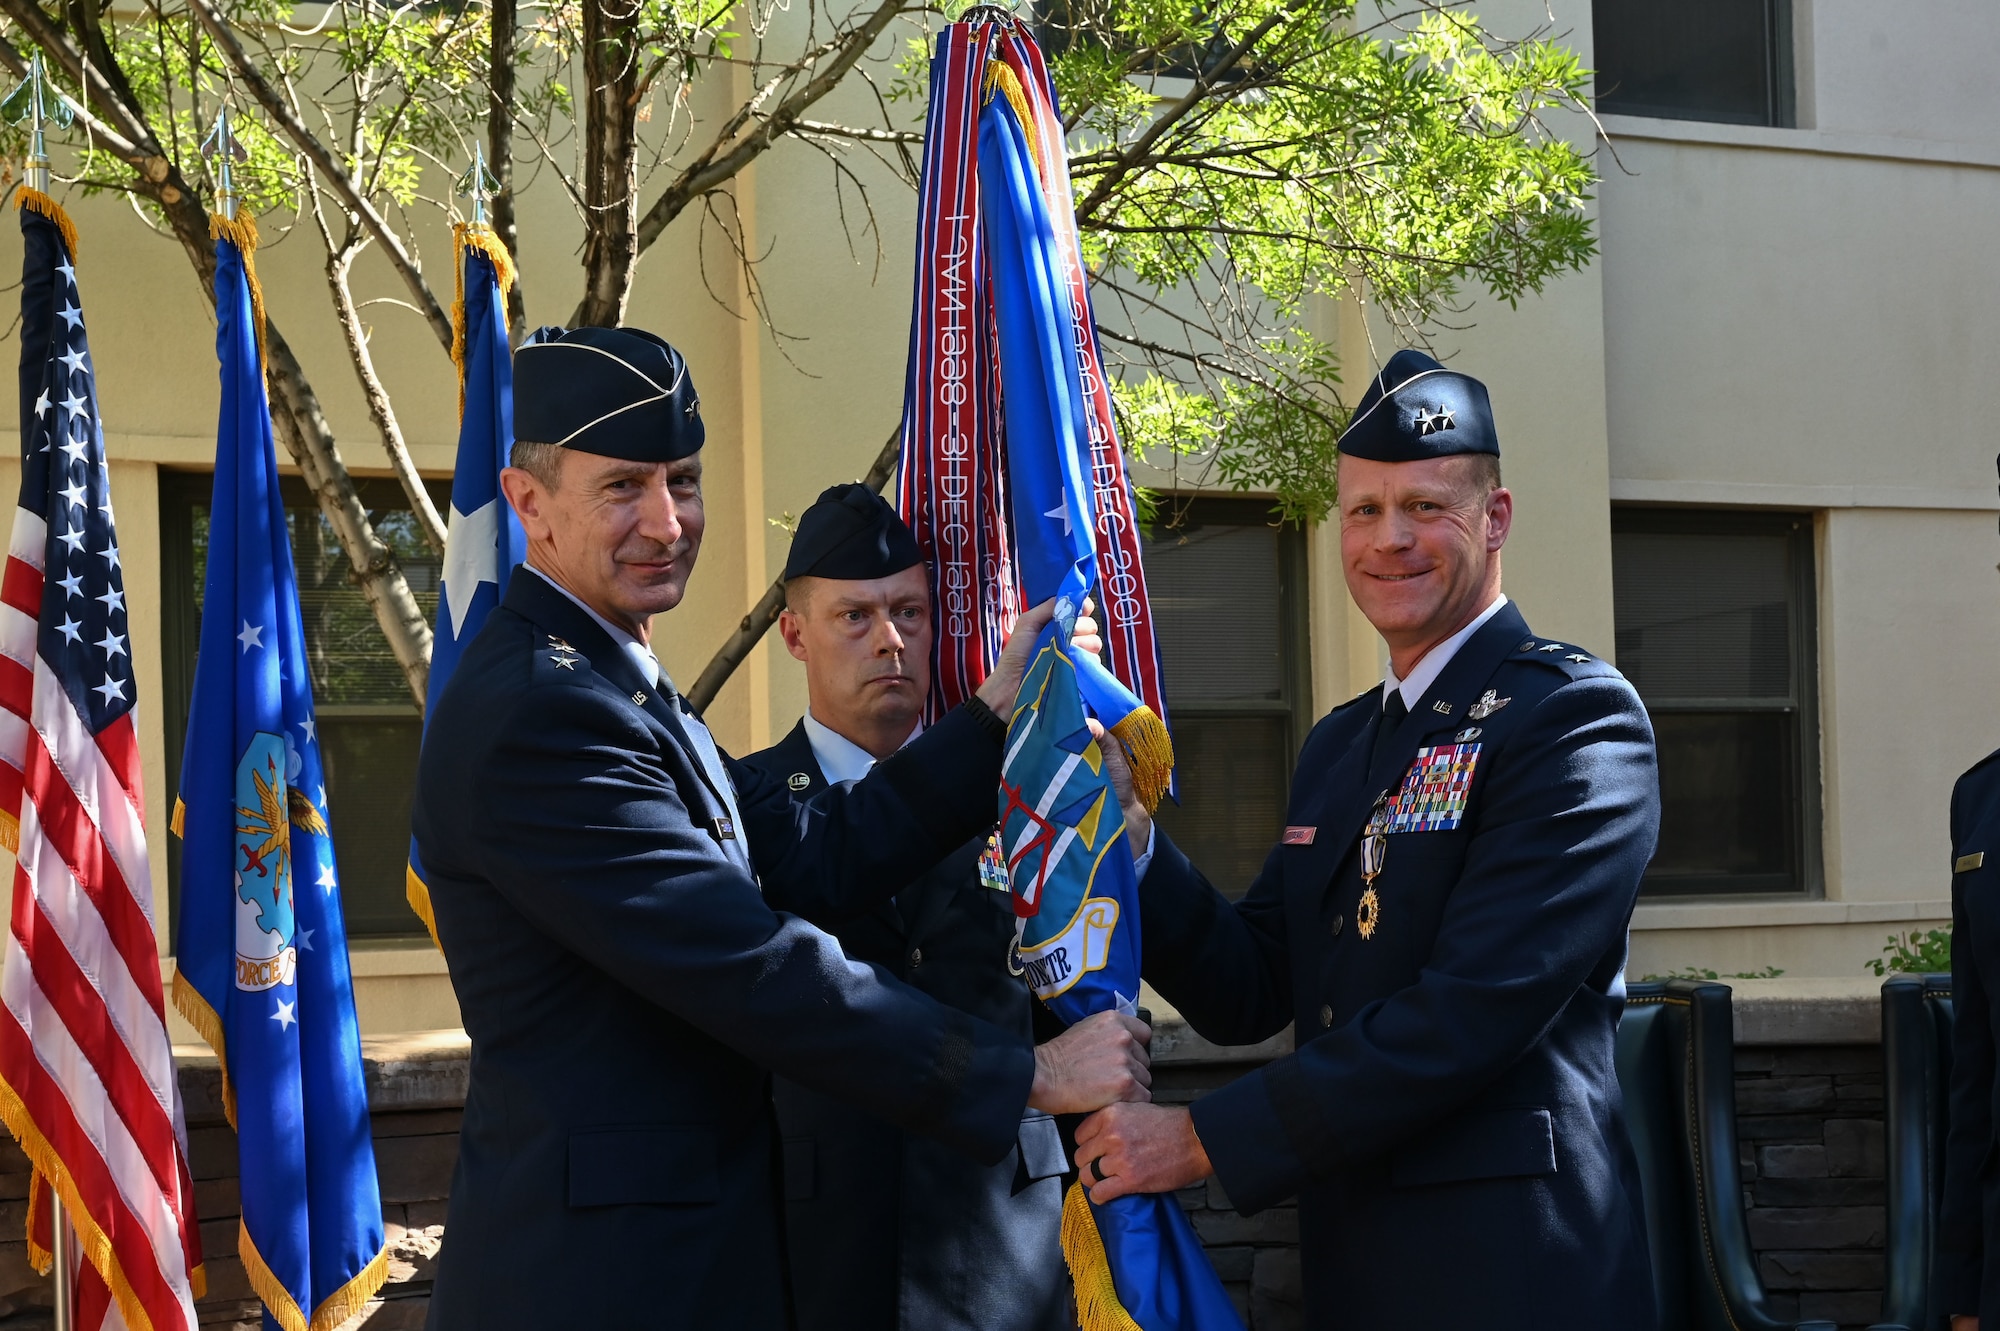 A man passes a guidon to another man.